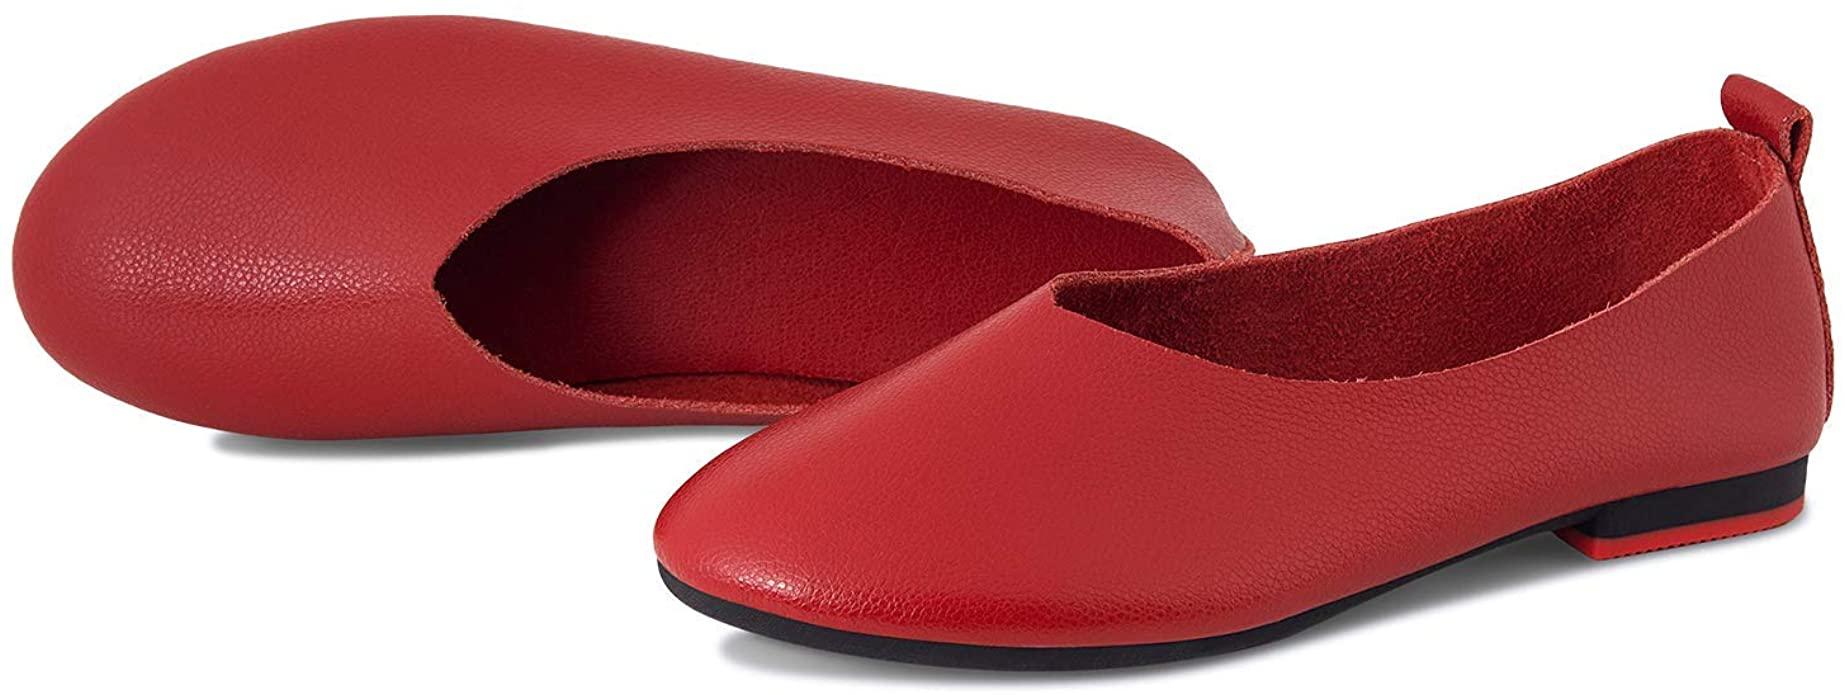 20 Shoes That Prove “Comfort Footwear” Can Actually Be Cute